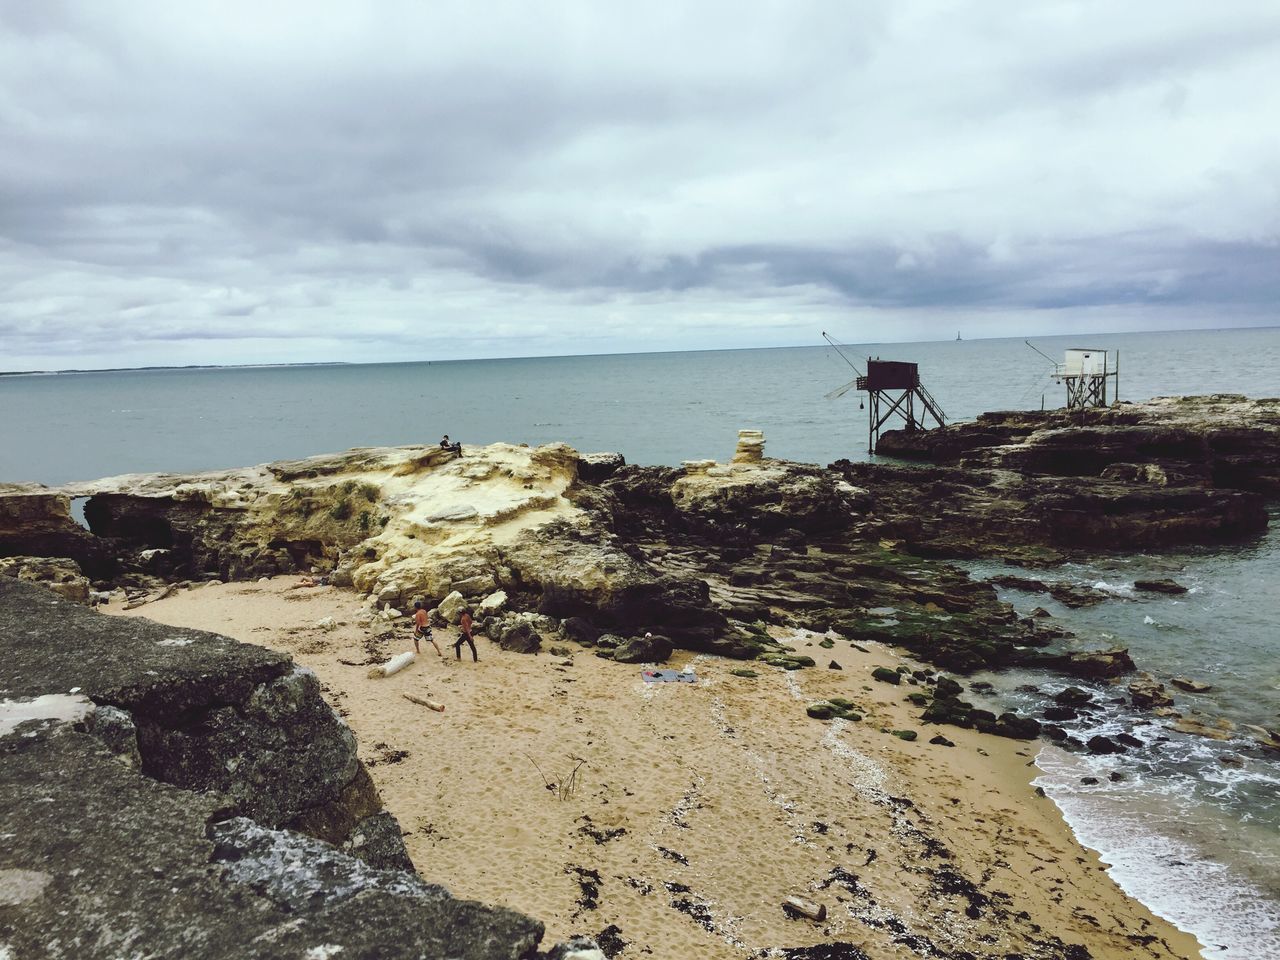 sea, sky, water, beach, cloud - sky, horizon over water, cloudy, shore, tranquil scene, tranquility, scenics, beauty in nature, nature, cloud, pier, weather, idyllic, overcast, rock - object, remote, outdoors, day, calm, coastline, non-urban scene, ocean, wooden post